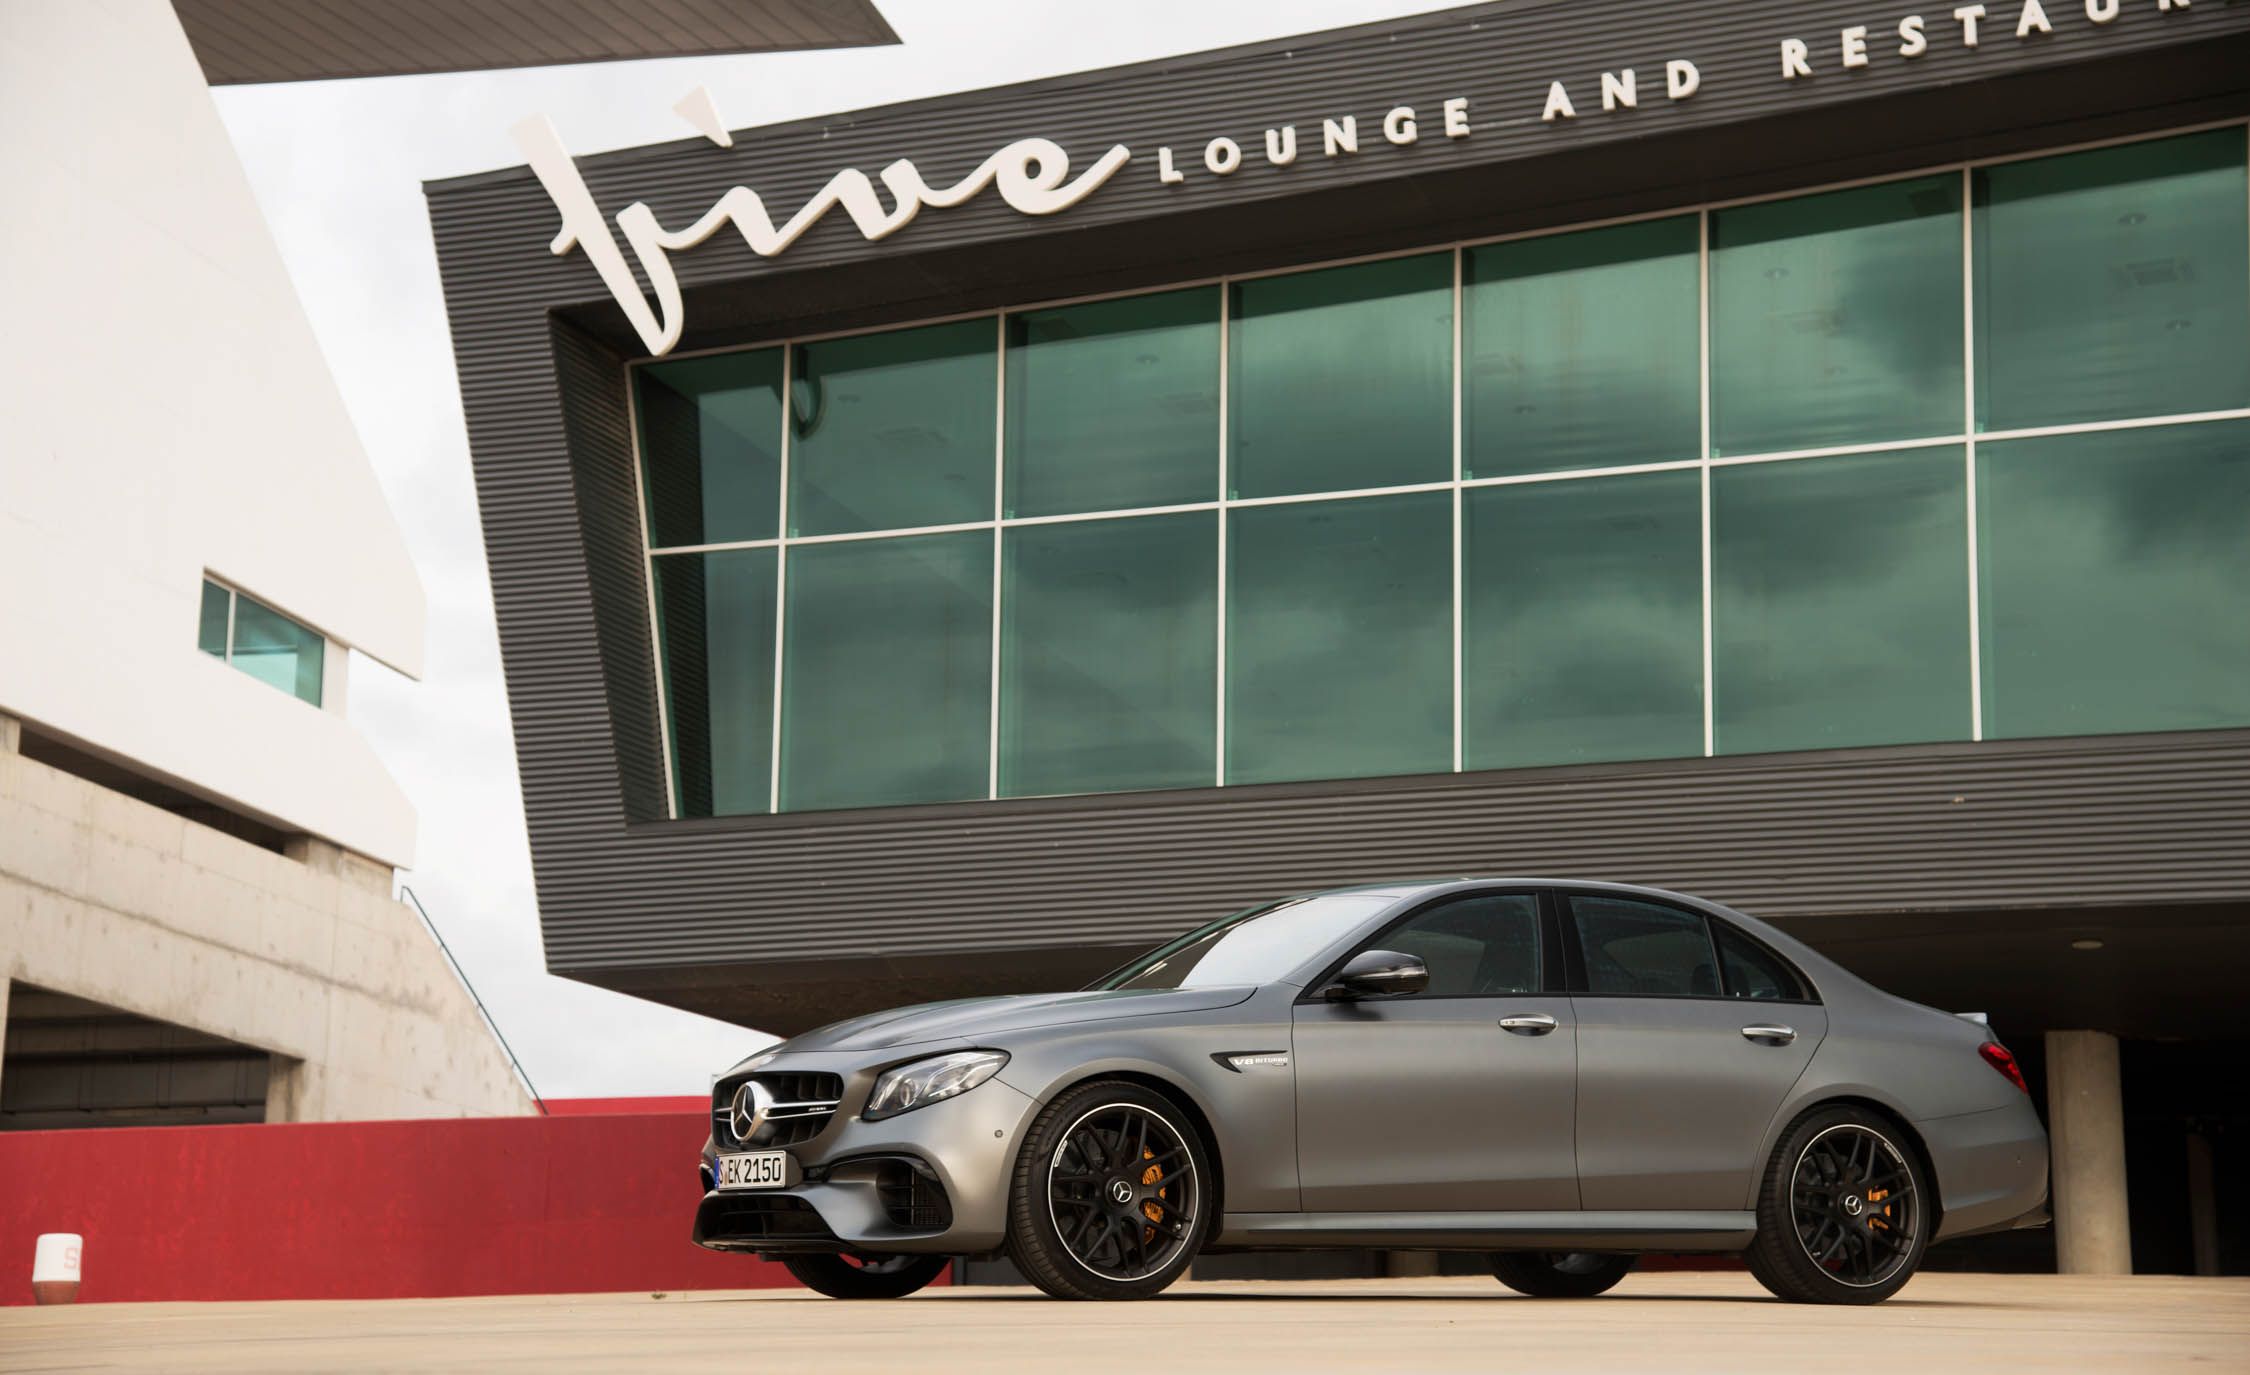 2018 Mercedes Amg E63s (View 13 of 41)